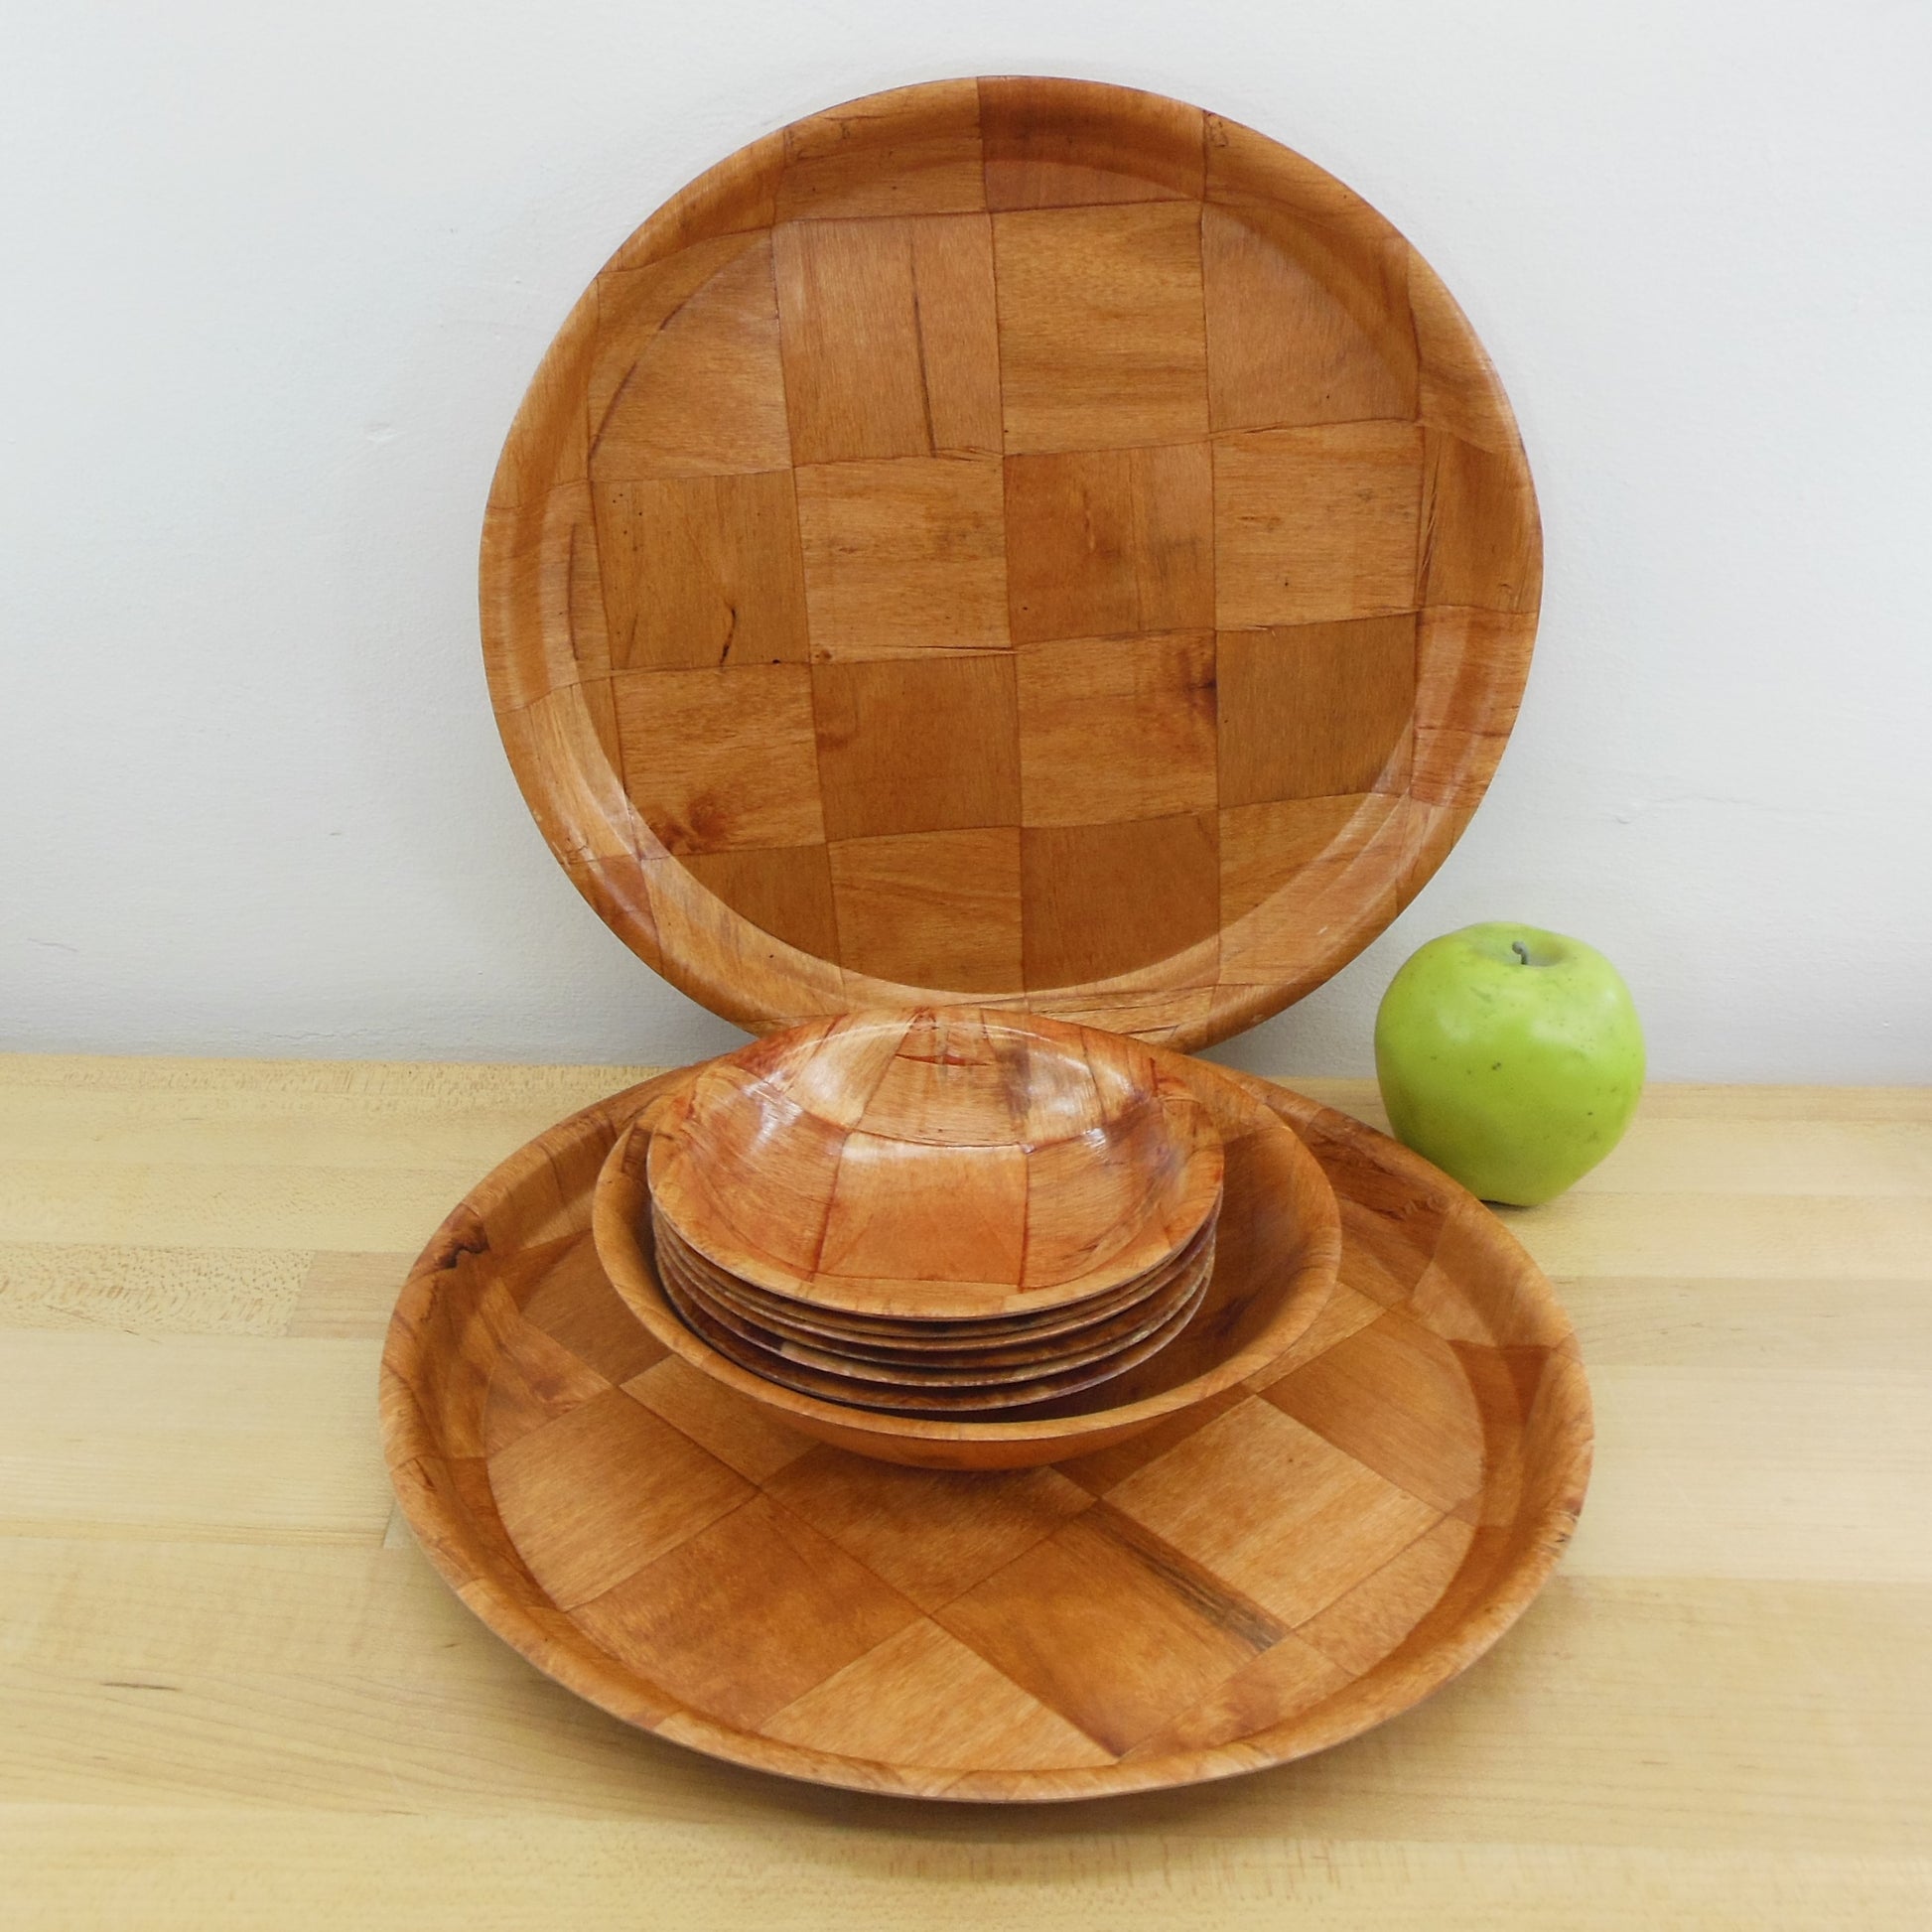 Weavewood Pressed Woven Wood Trays & Bowls